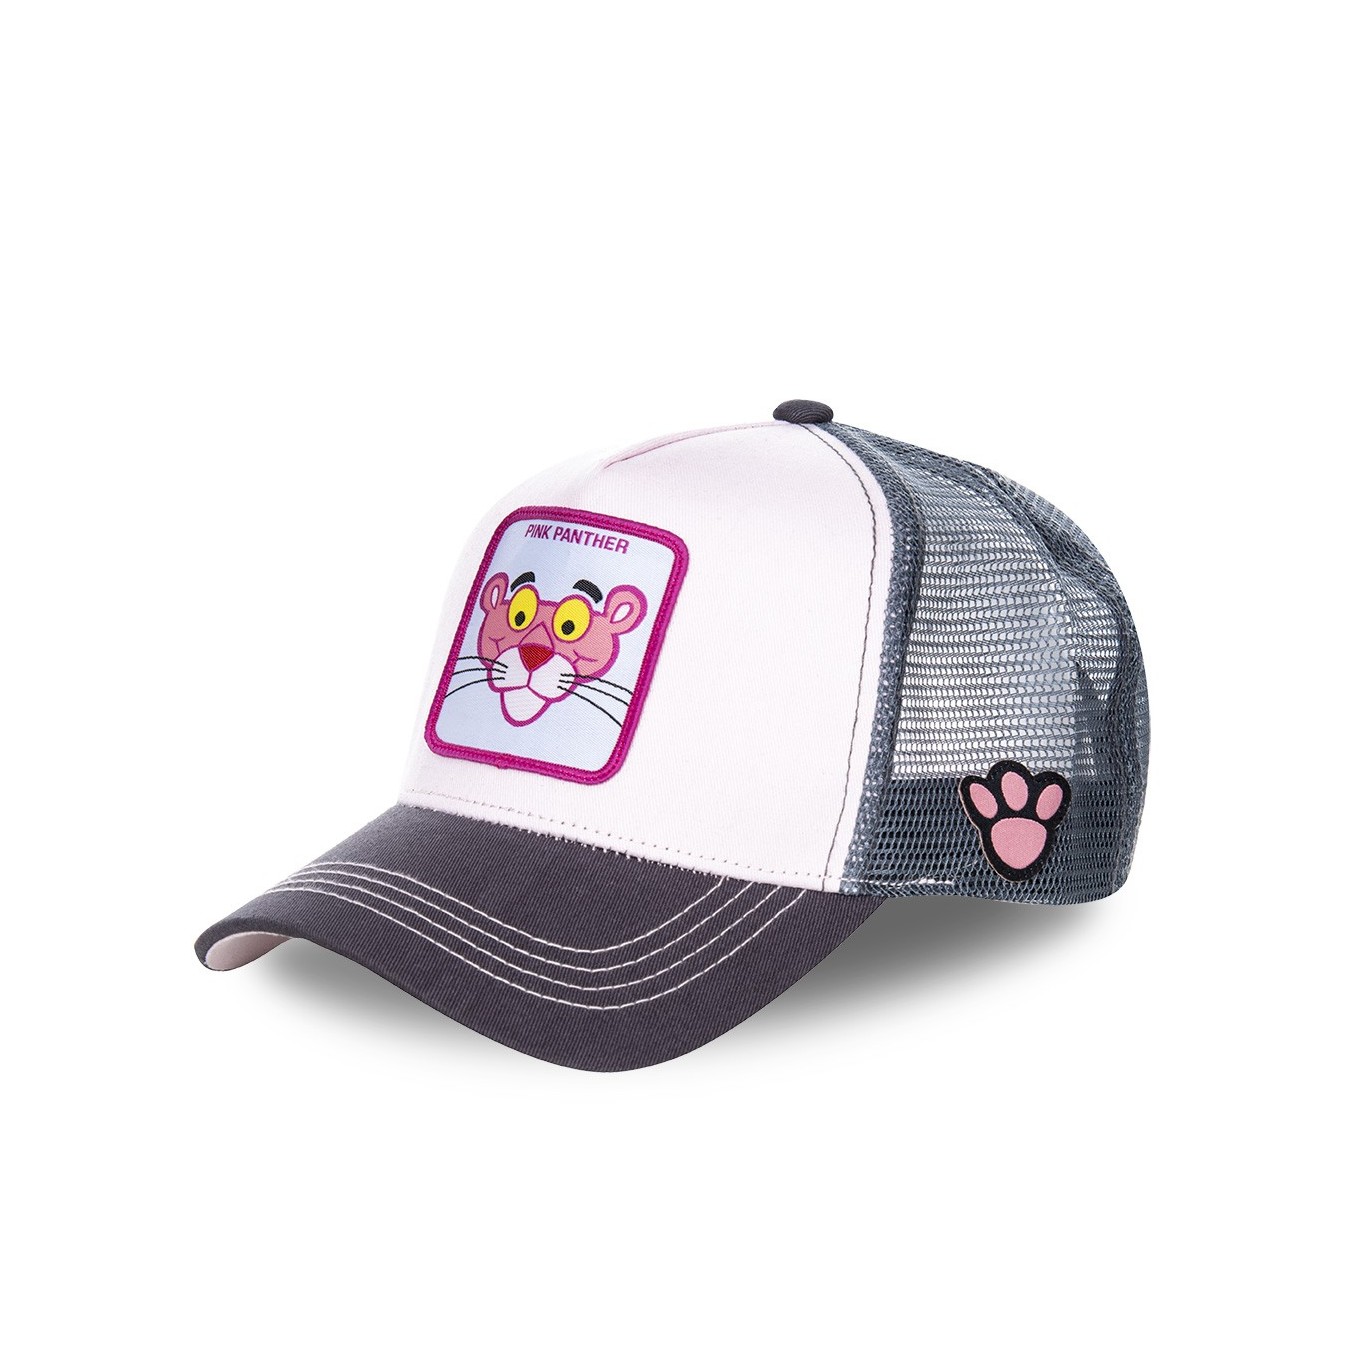 Casquette Pink Panther Panthere Rose CapsLab Capslab - 1